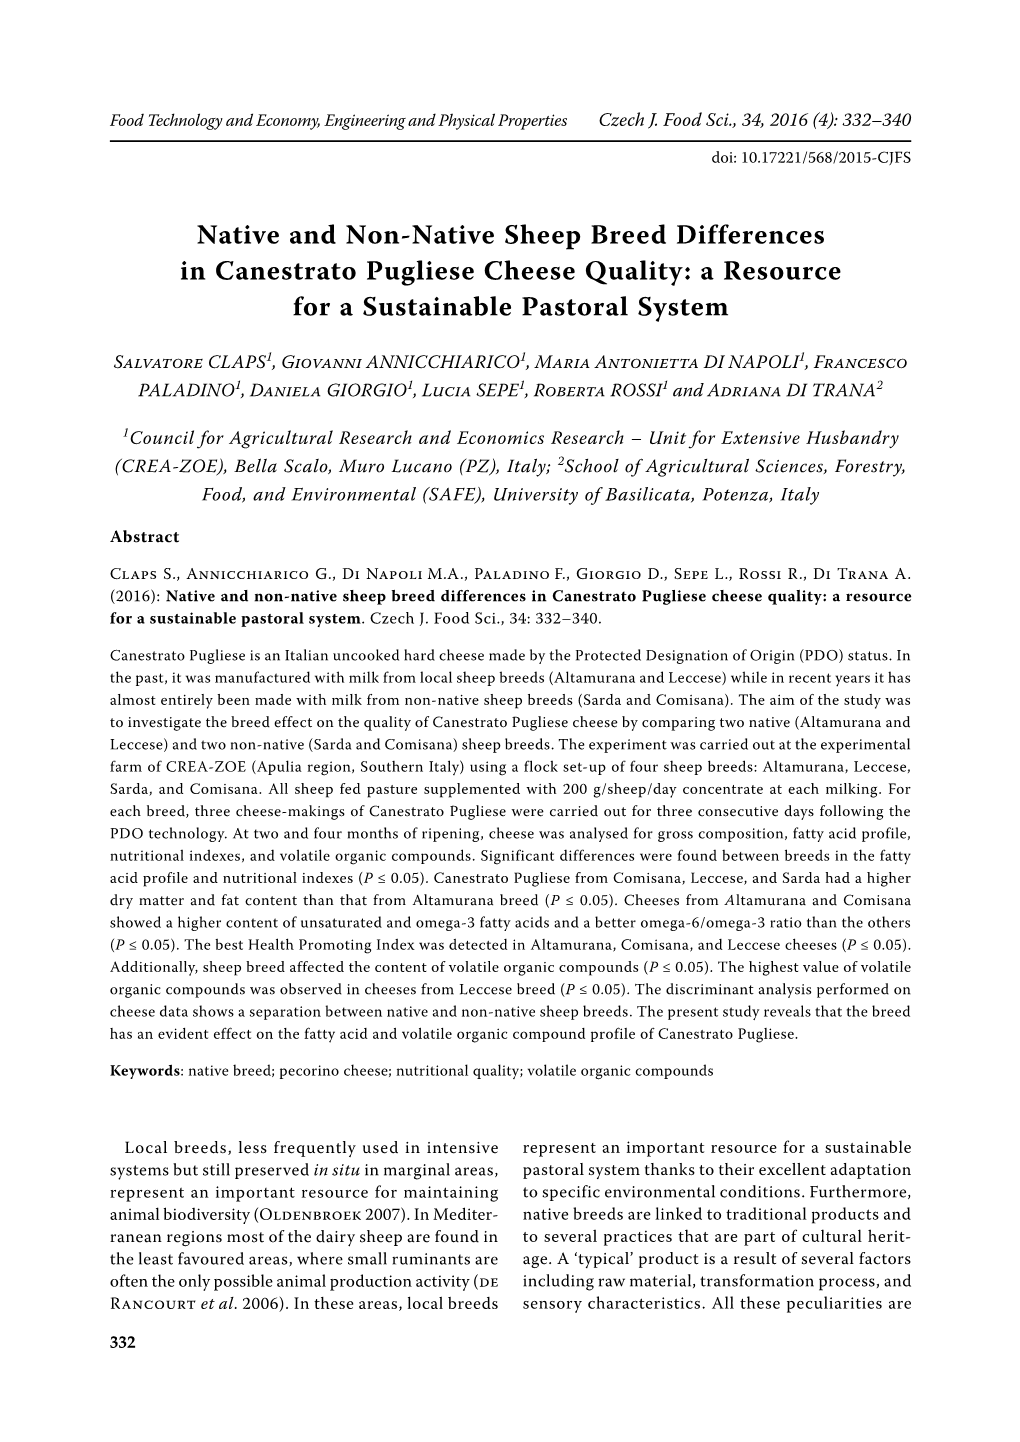 Native and Non-Native Sheep Breed Differences in Canestrato Pugliese Cheese Quality: a Resource for a Sustainable Pastoral System